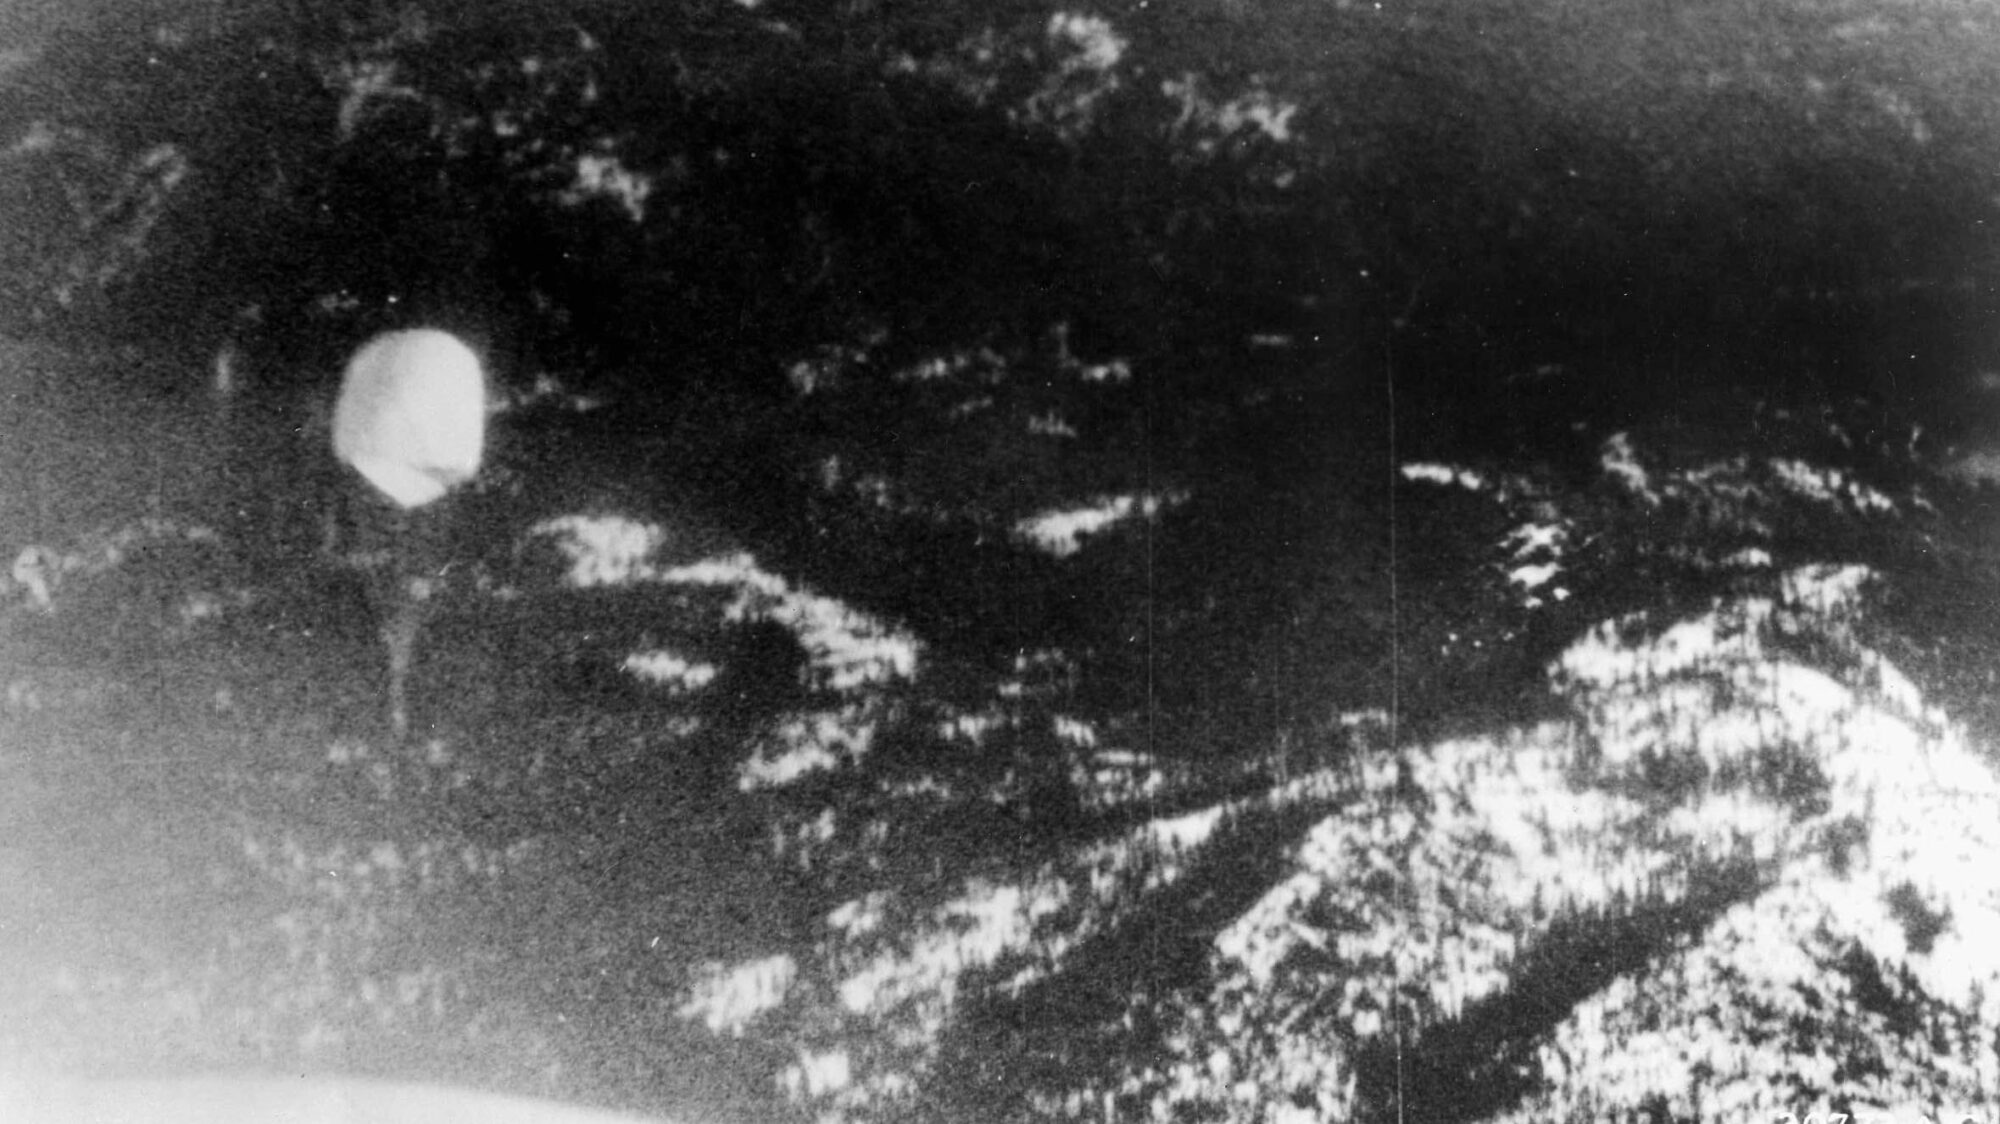 Long Before Chinese Spy Balloons, Japan Sent the Fu-Go Balloon Bomb